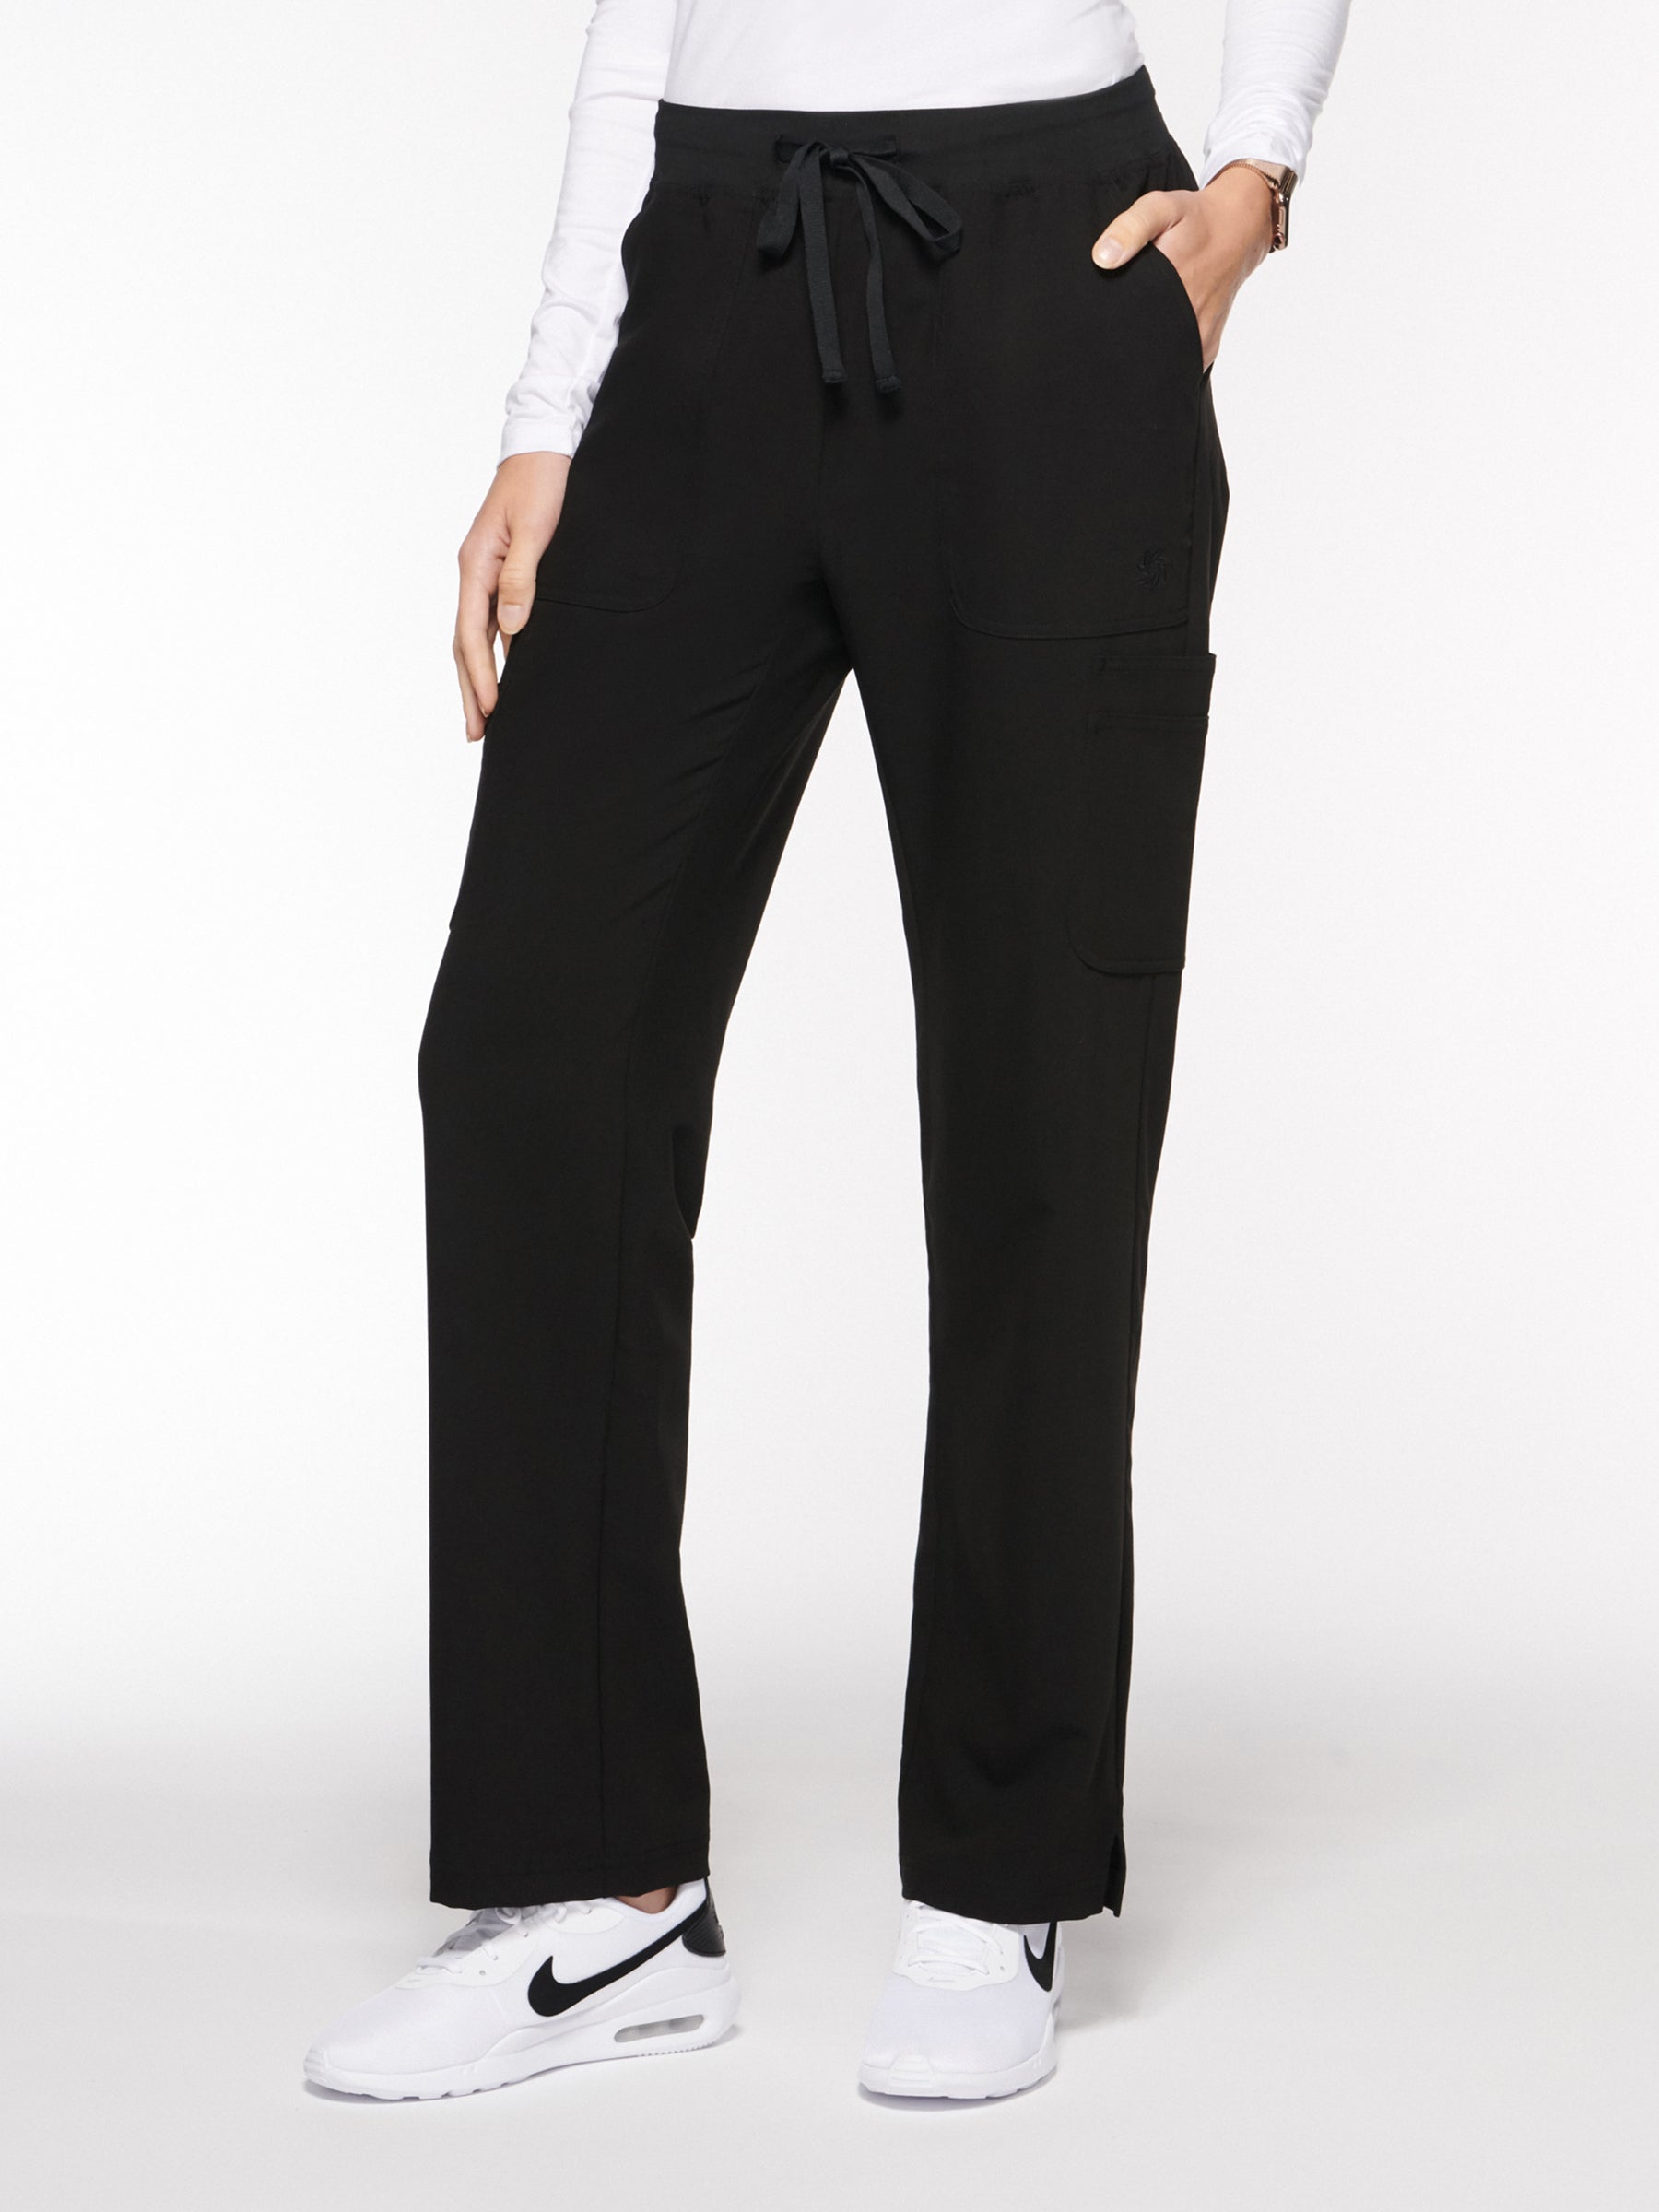 Womens Pant Yoga Pant with 9 Pockets – Long (93002L) - A Plus Medical Scrubs